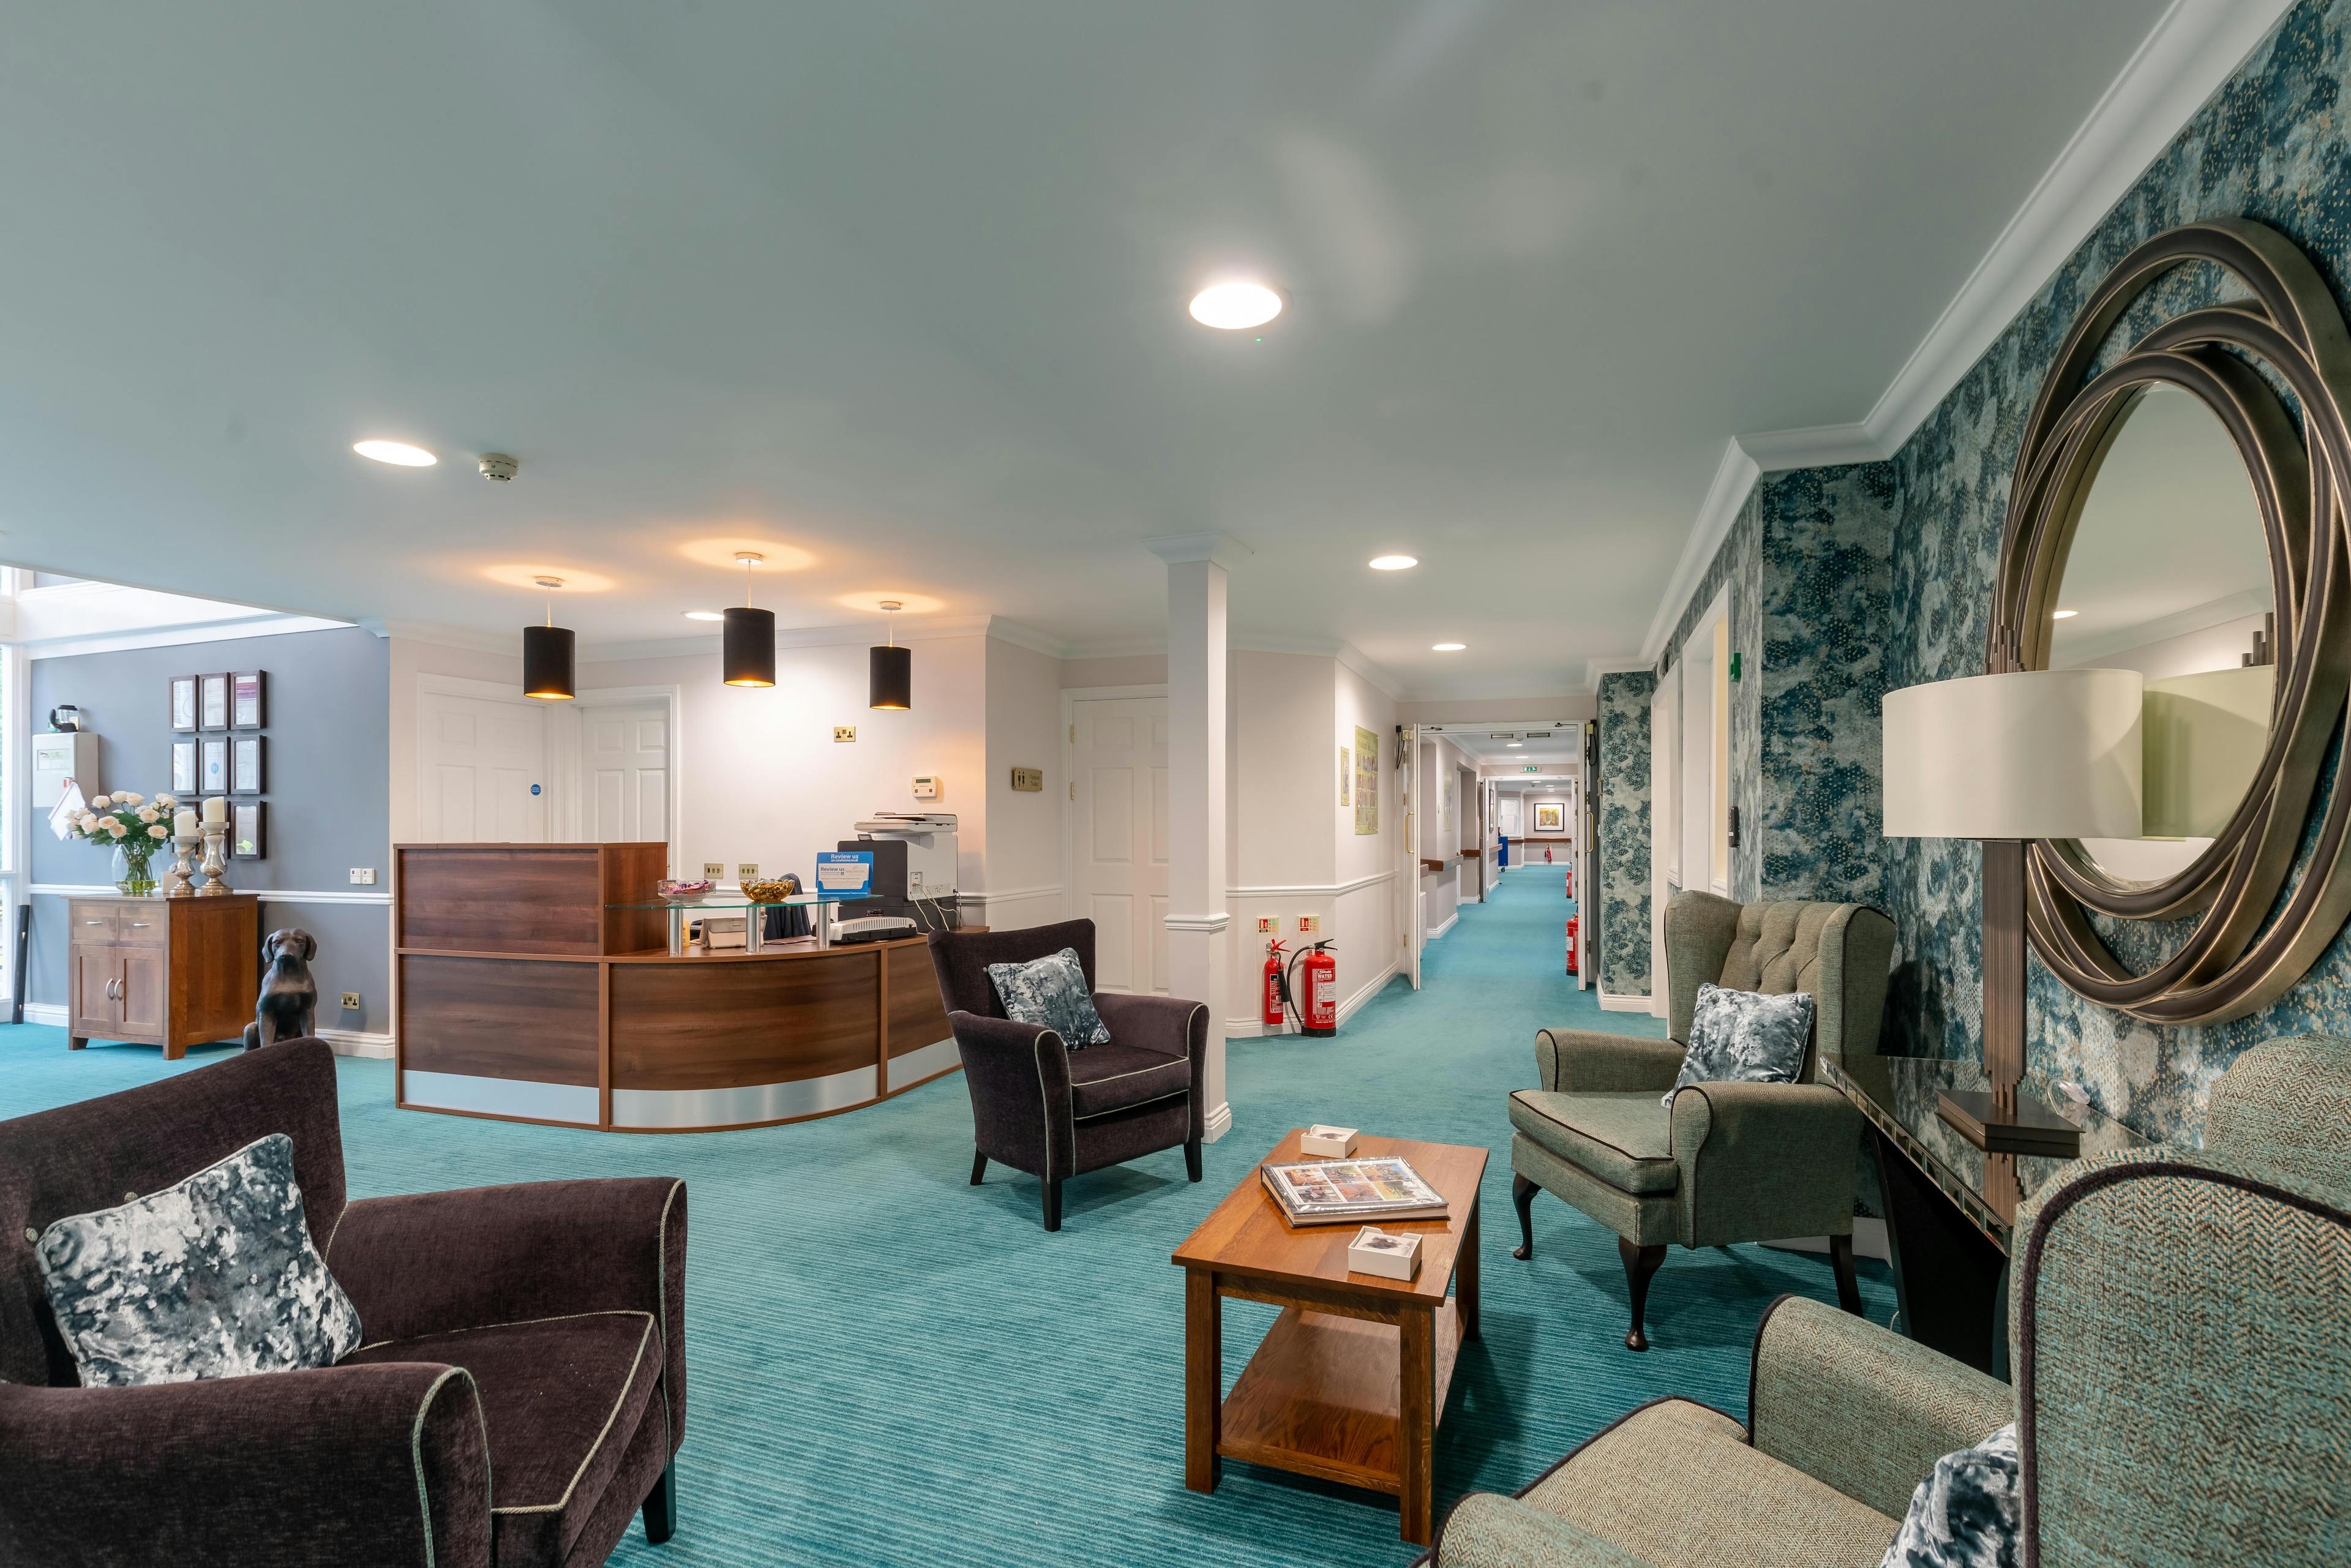 Reception at Tandridge Heights Care Home in Oxted, Surrey